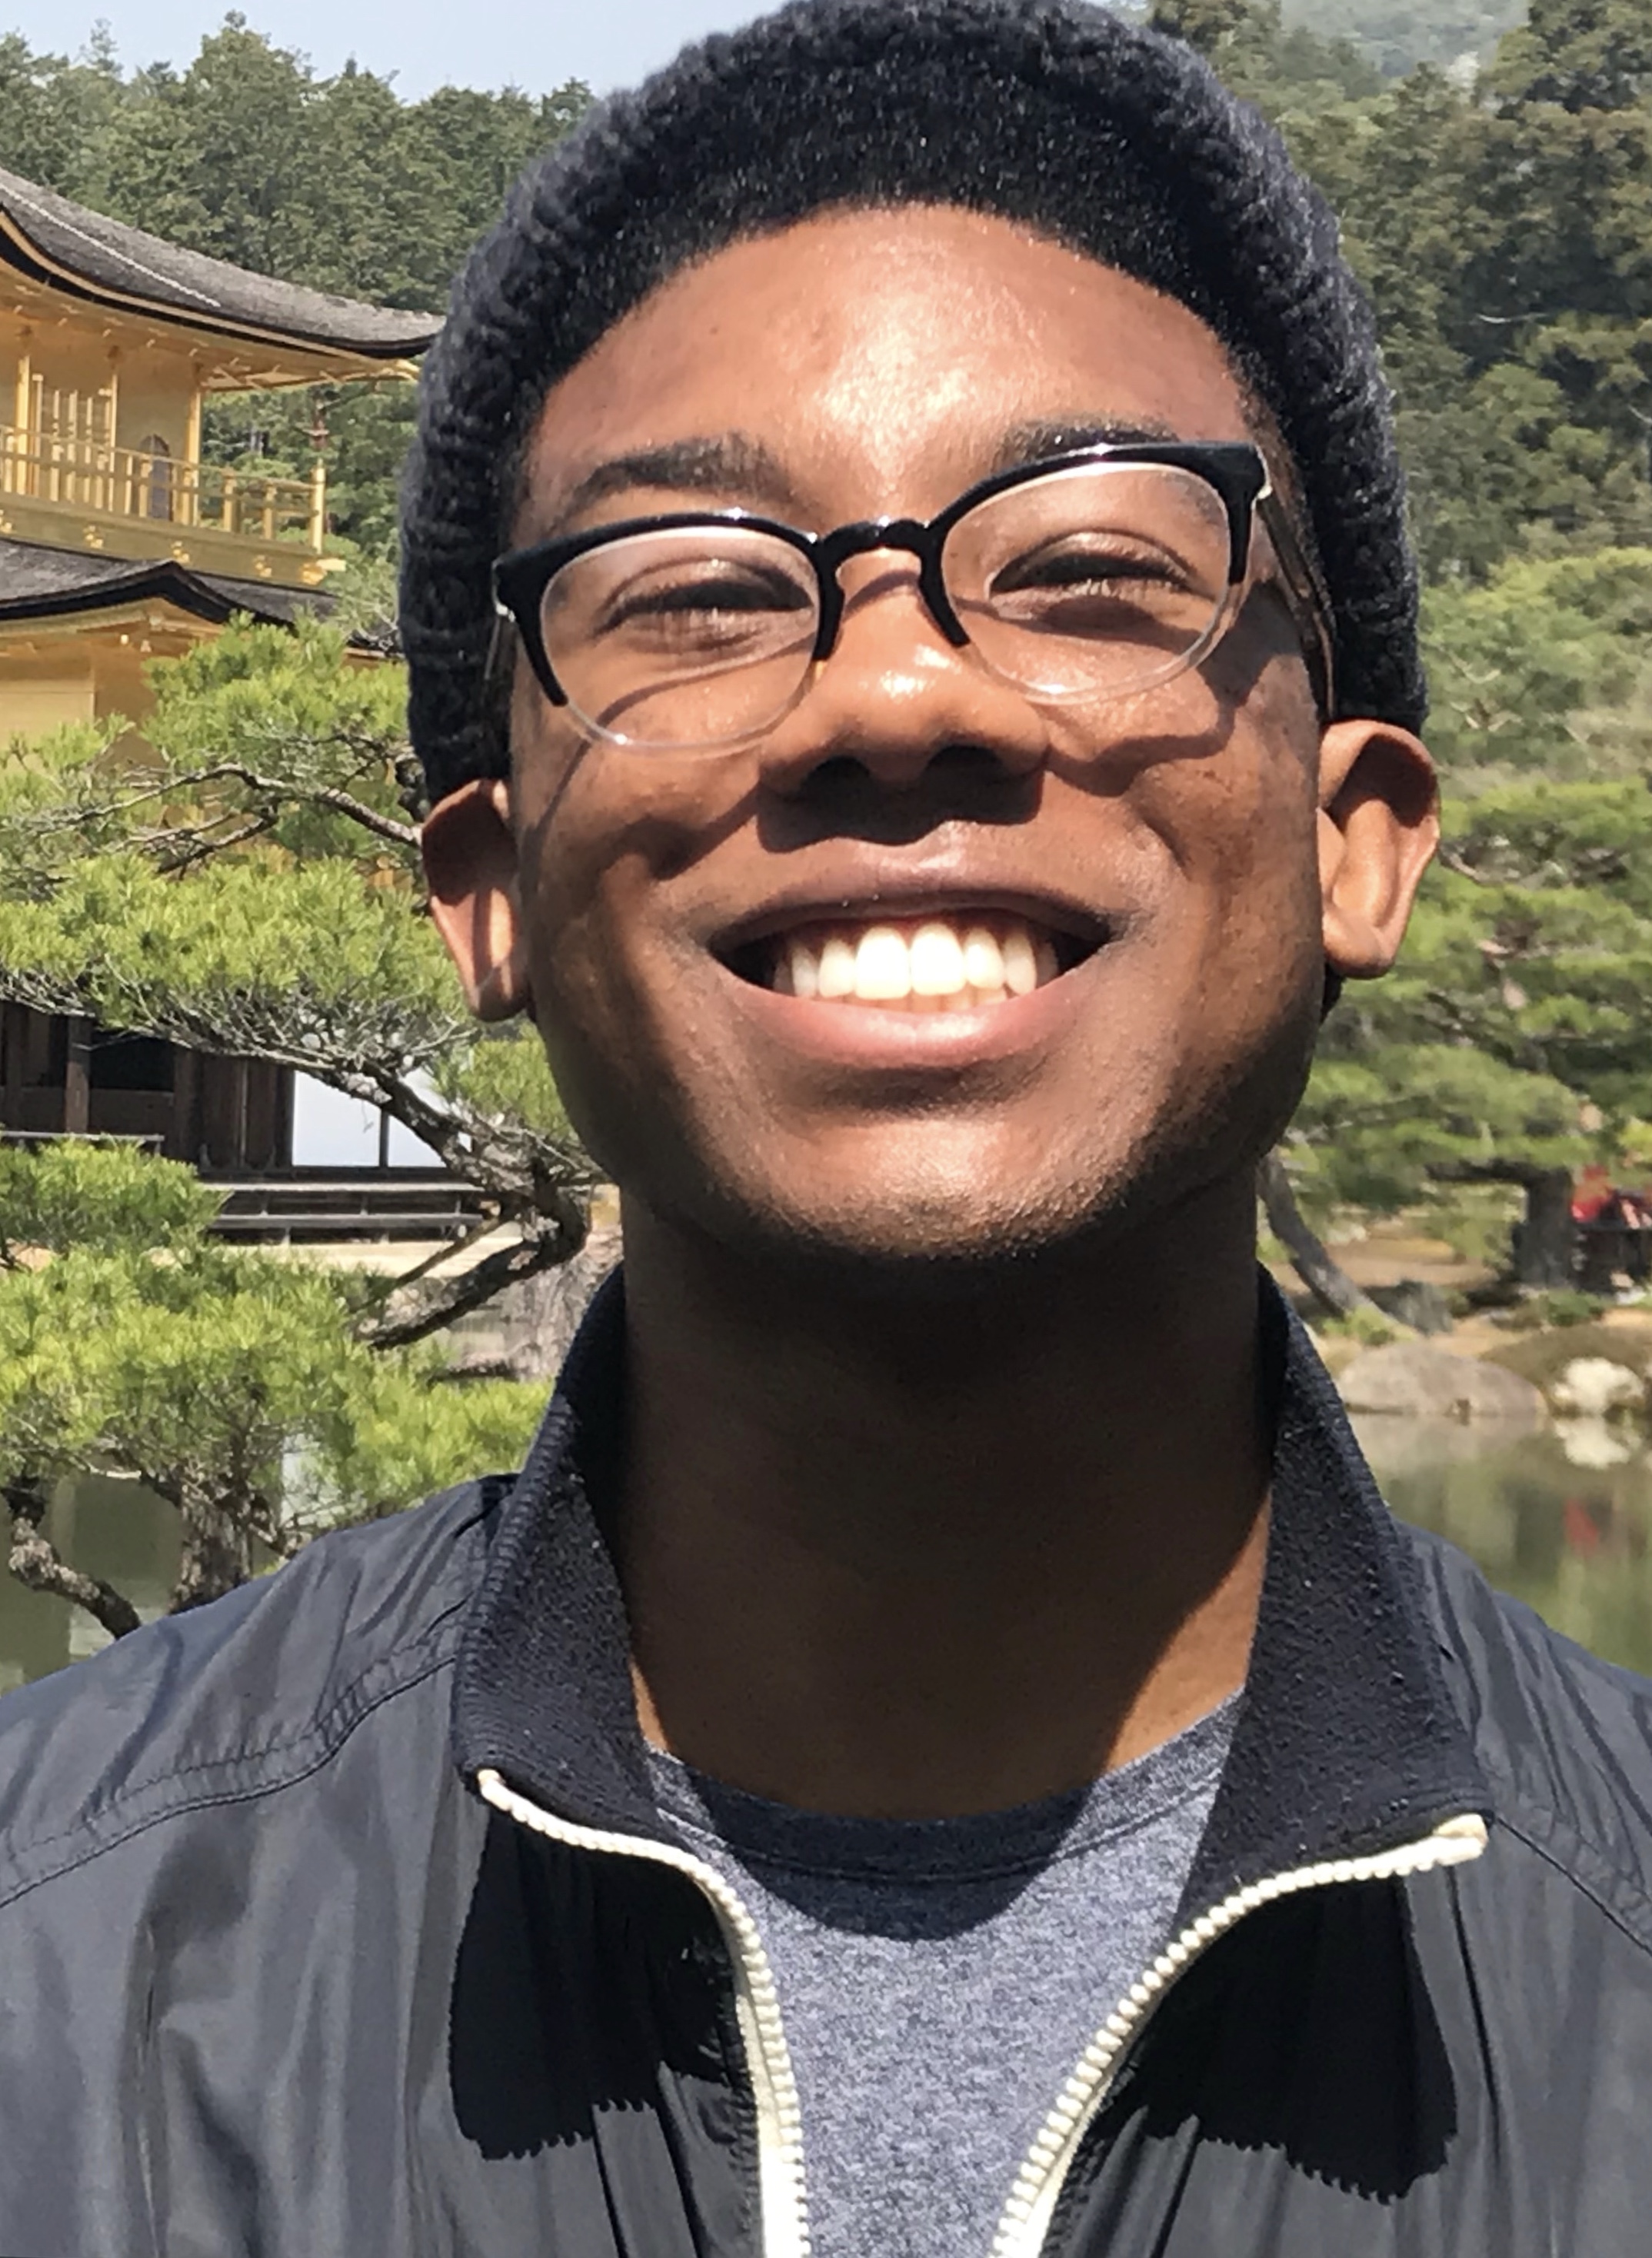 Cute Teen Glasses Facial Captions - April 2019 â€” Visible Poetry Project